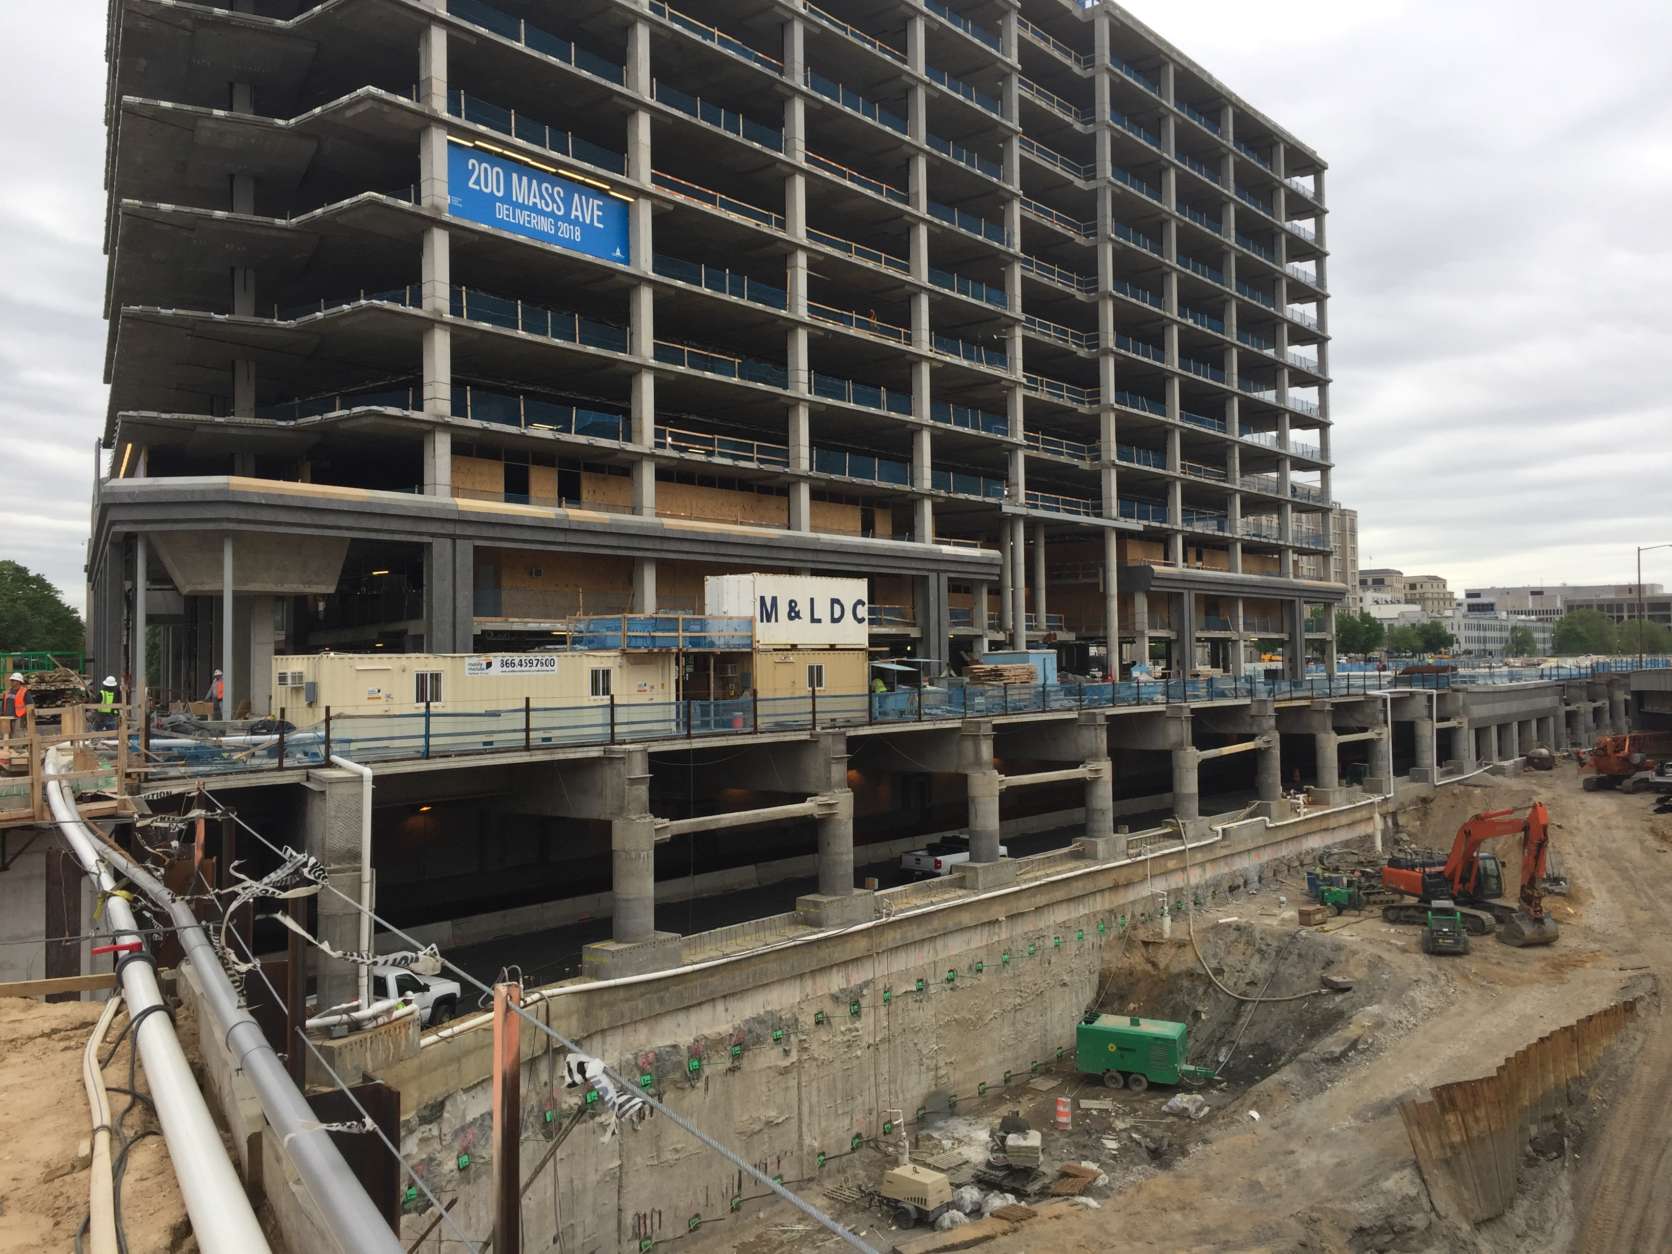 200 Massachusetts Avenue is scheduled to open in mid-2018, with commercial and retail space. The white truck pictured is parked on the soon to open access ramp from Massachusetts Avenue to I-395 southbound.  (WTOP/Kristi King)